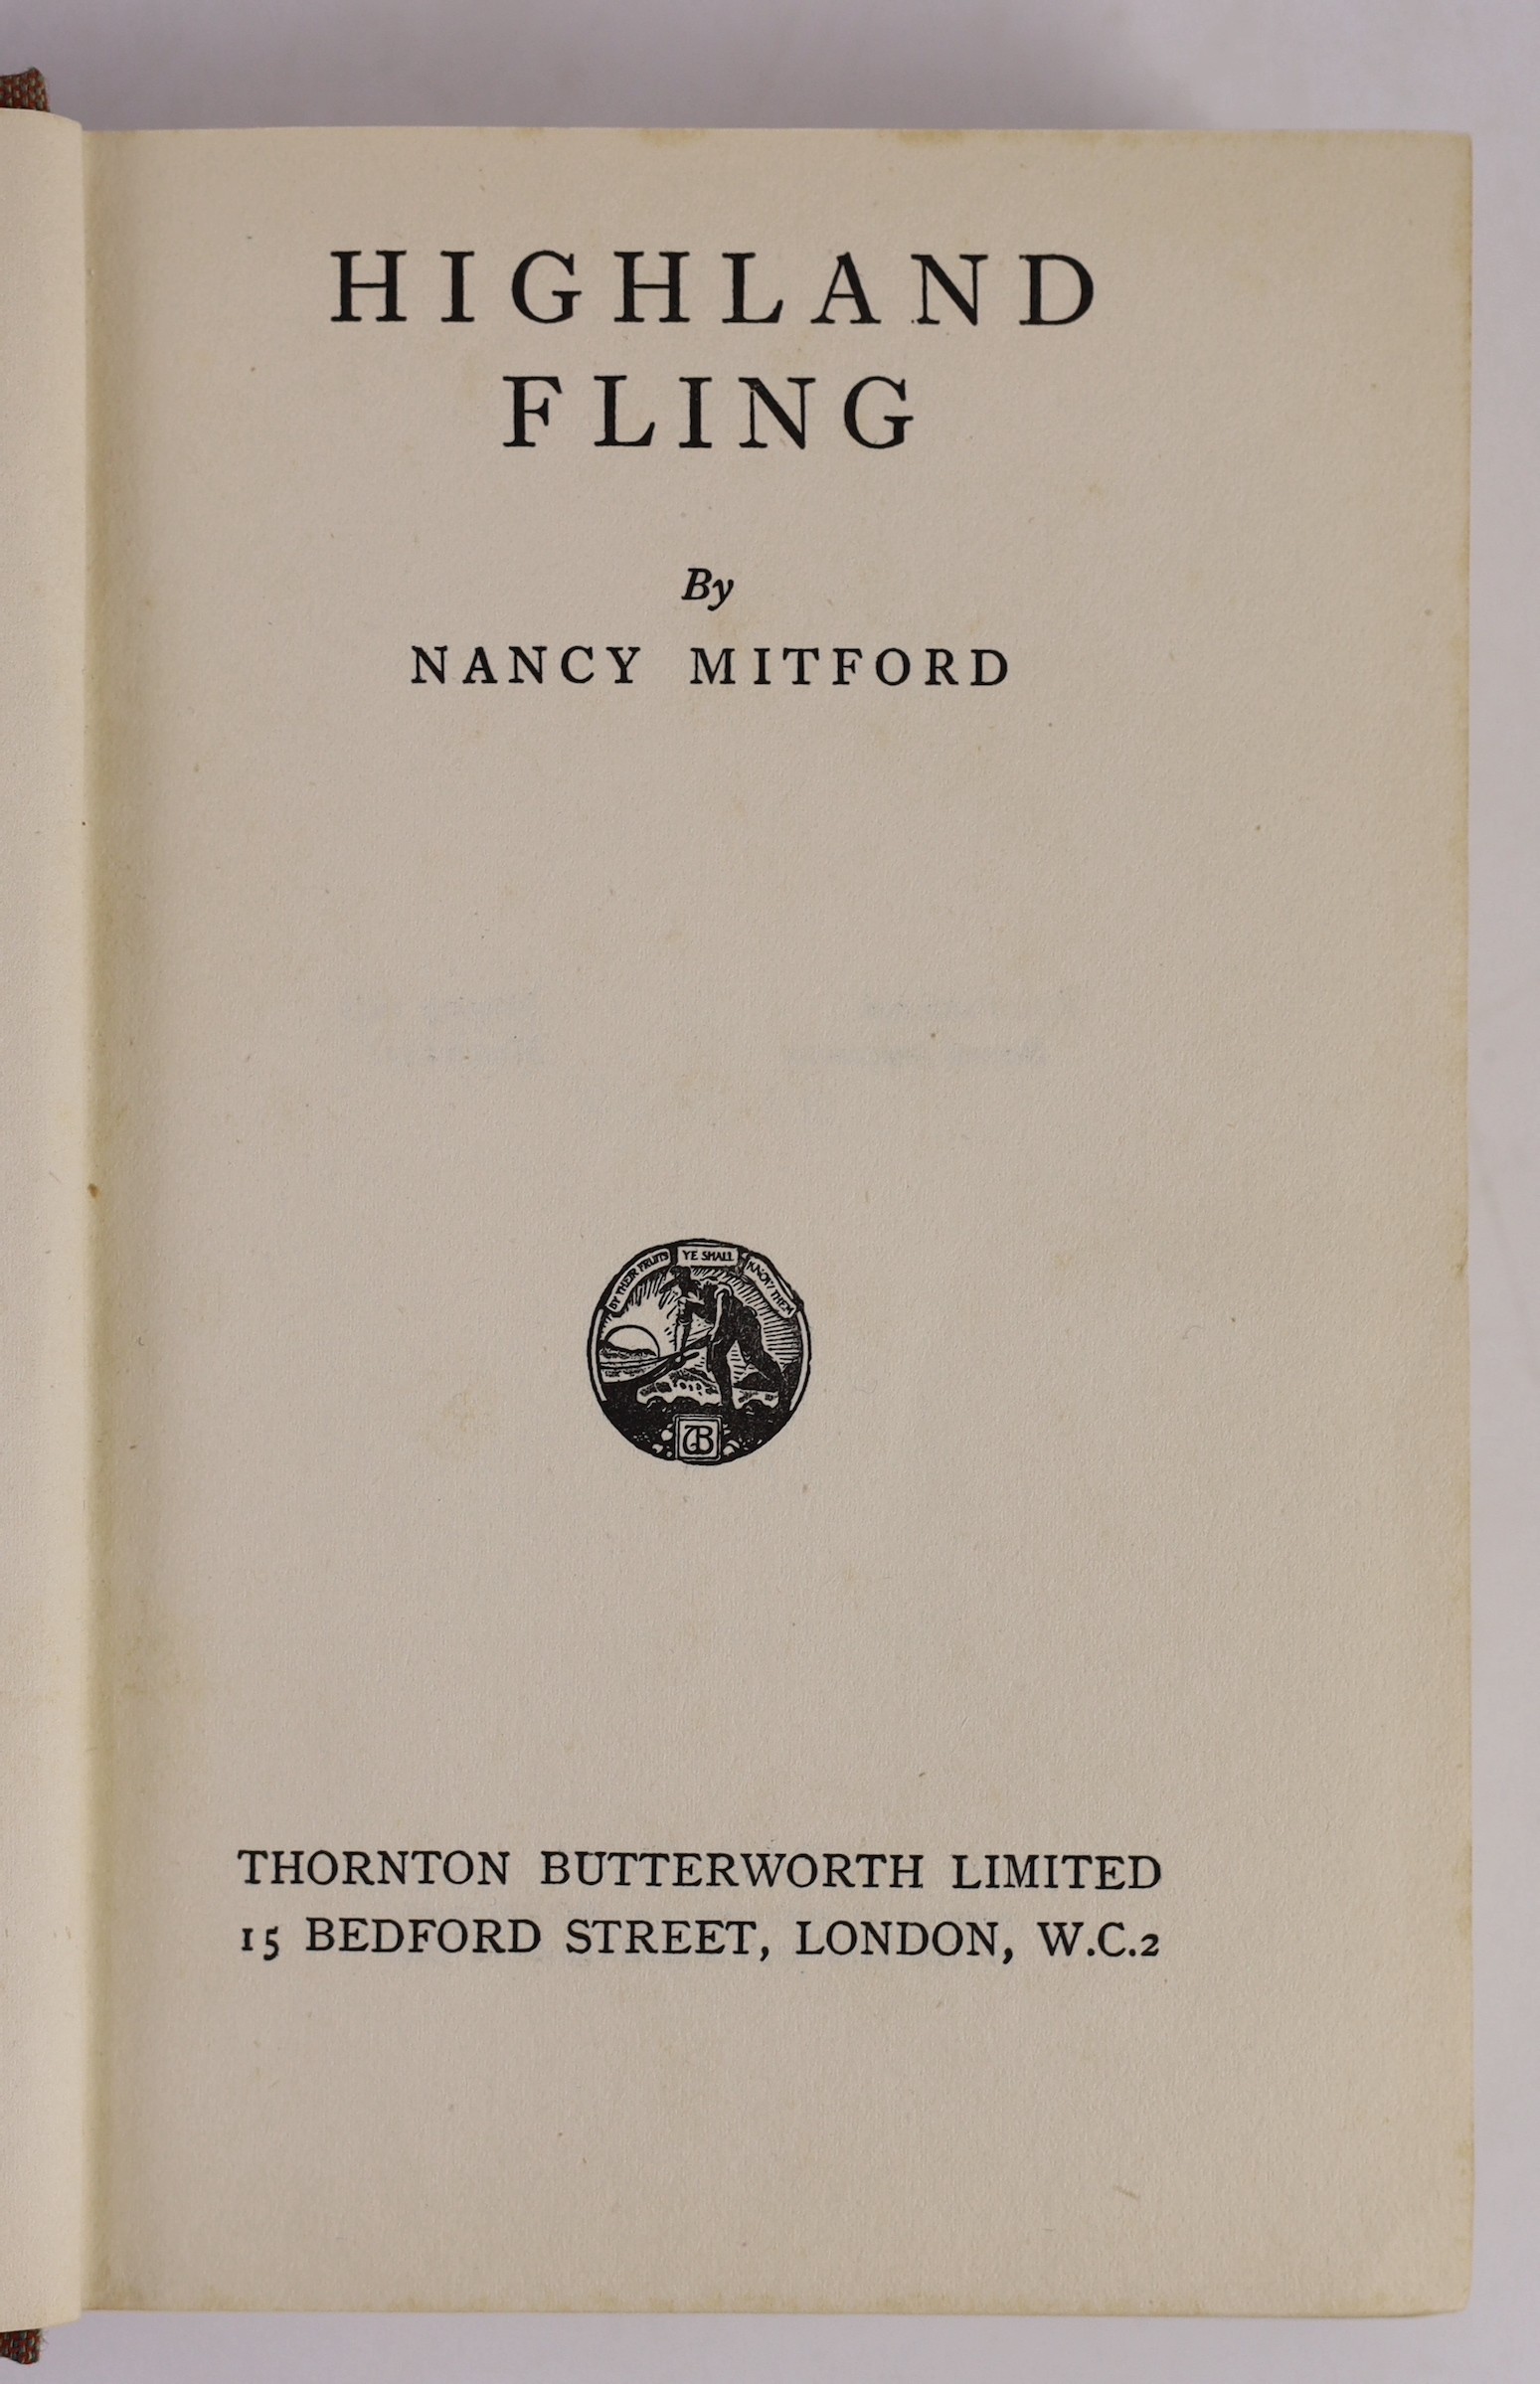 Mitford, Nancy - Highland Fling, 1st edition, 2nd impression, 8vo, cloth, the authors first published work, Thornton Butterworth, London, 1931